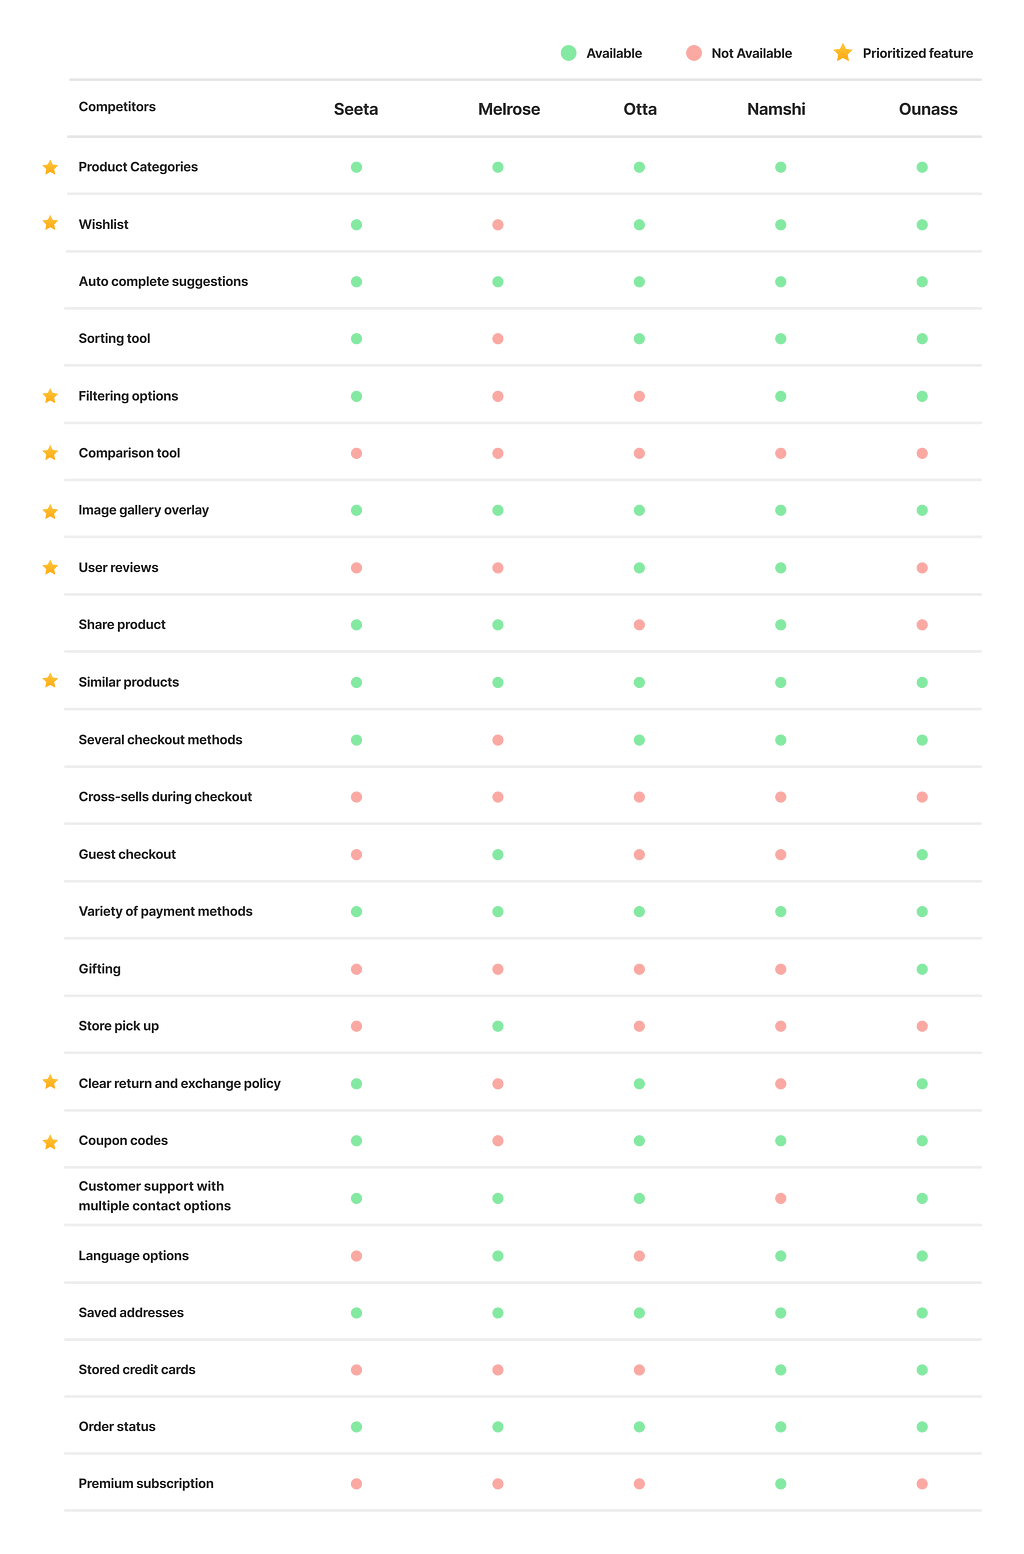 A comparison diagram titled “C&C Feature Analysis for Ivy Concept Store Competitors” is displayed on a white background. The diagram compares the features of Ivy Concept Store’s competitors, including Setta Concept Store, Otta, Namshi, Ounass, and Melrose, in seven categories: Home & Categories, Search, About Us, Product Information, Cart & Checkout, Additional, and Account and Self-Service. The diagram indicates that Ounass has the most features among the competitors